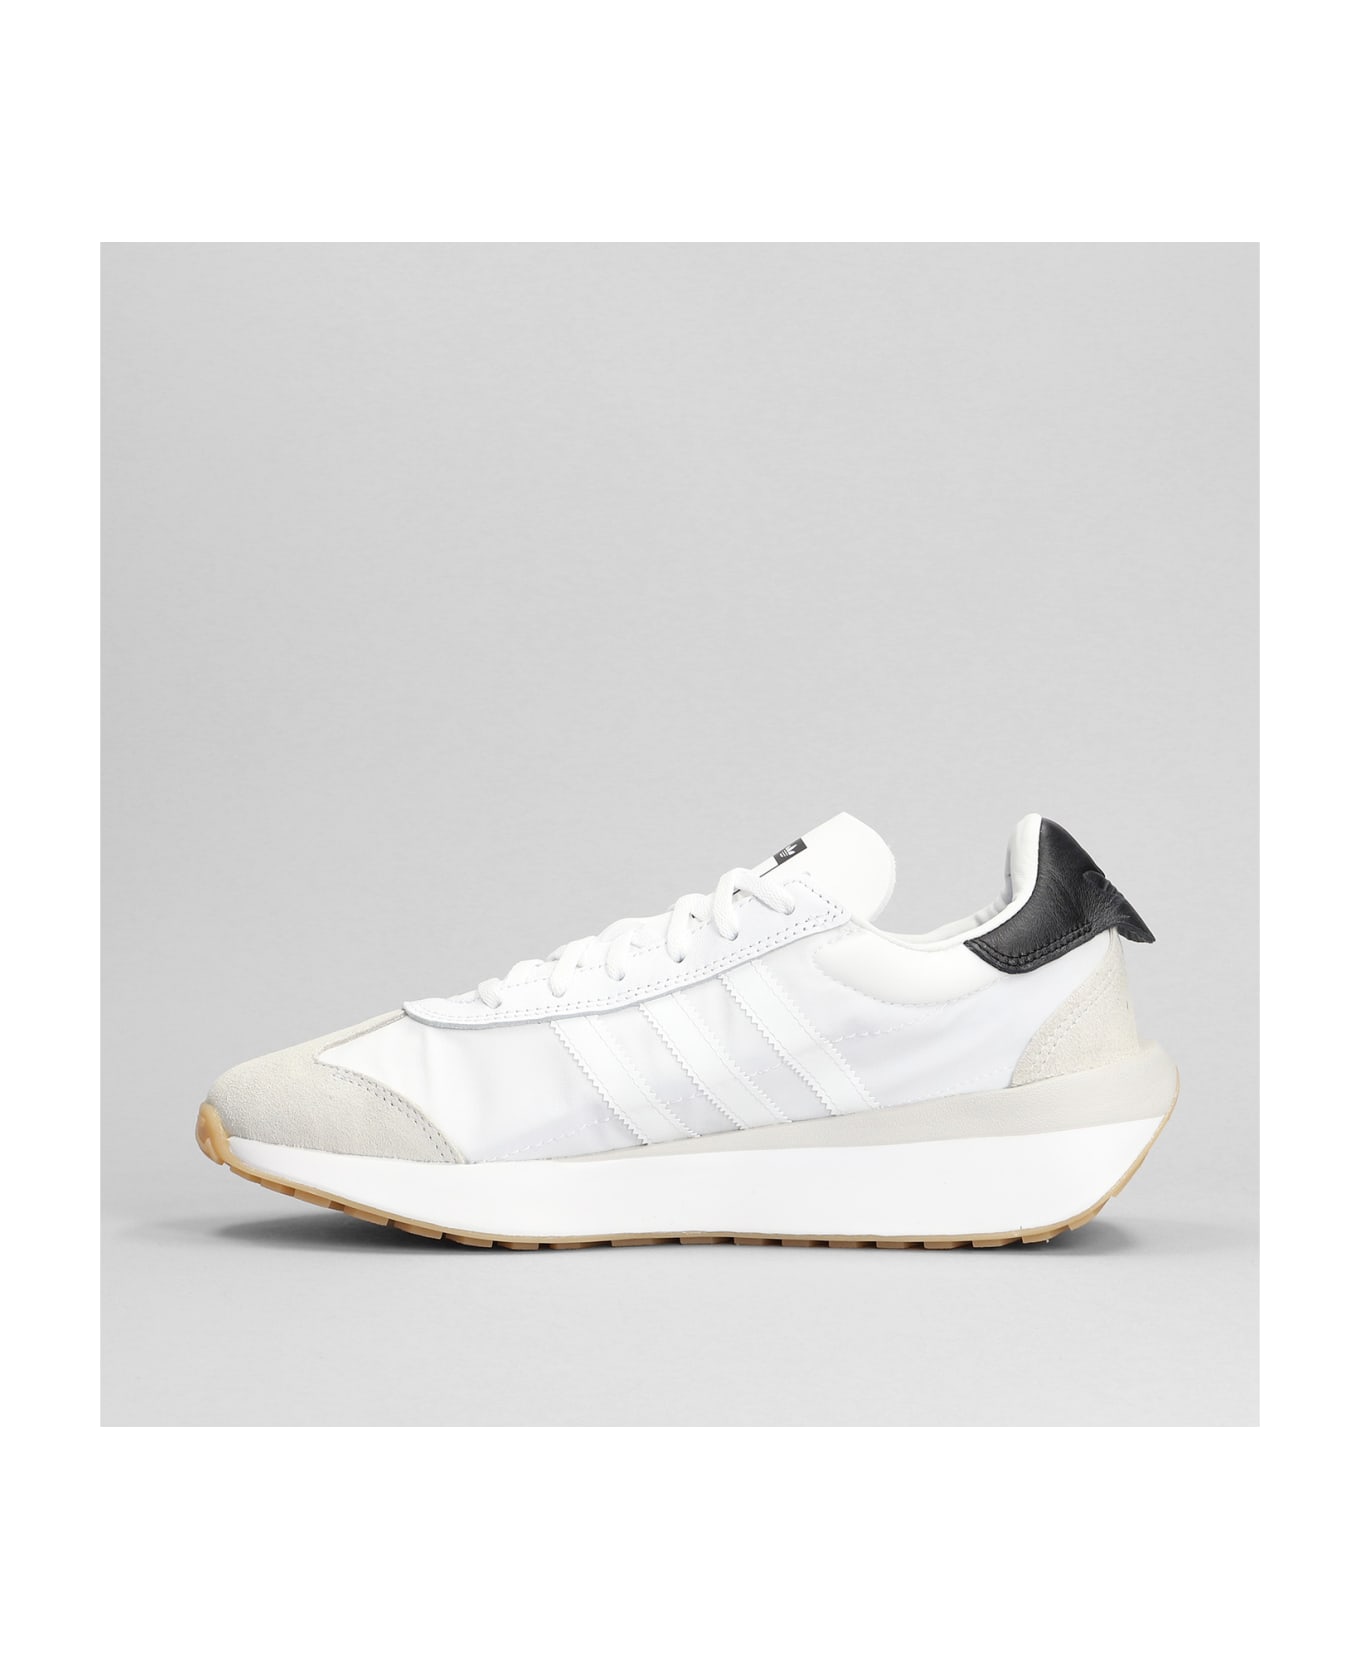 Adidas Originals Country Xlg Sneakers In White Synthetic Fibers - Ftwwht/cblack/greone